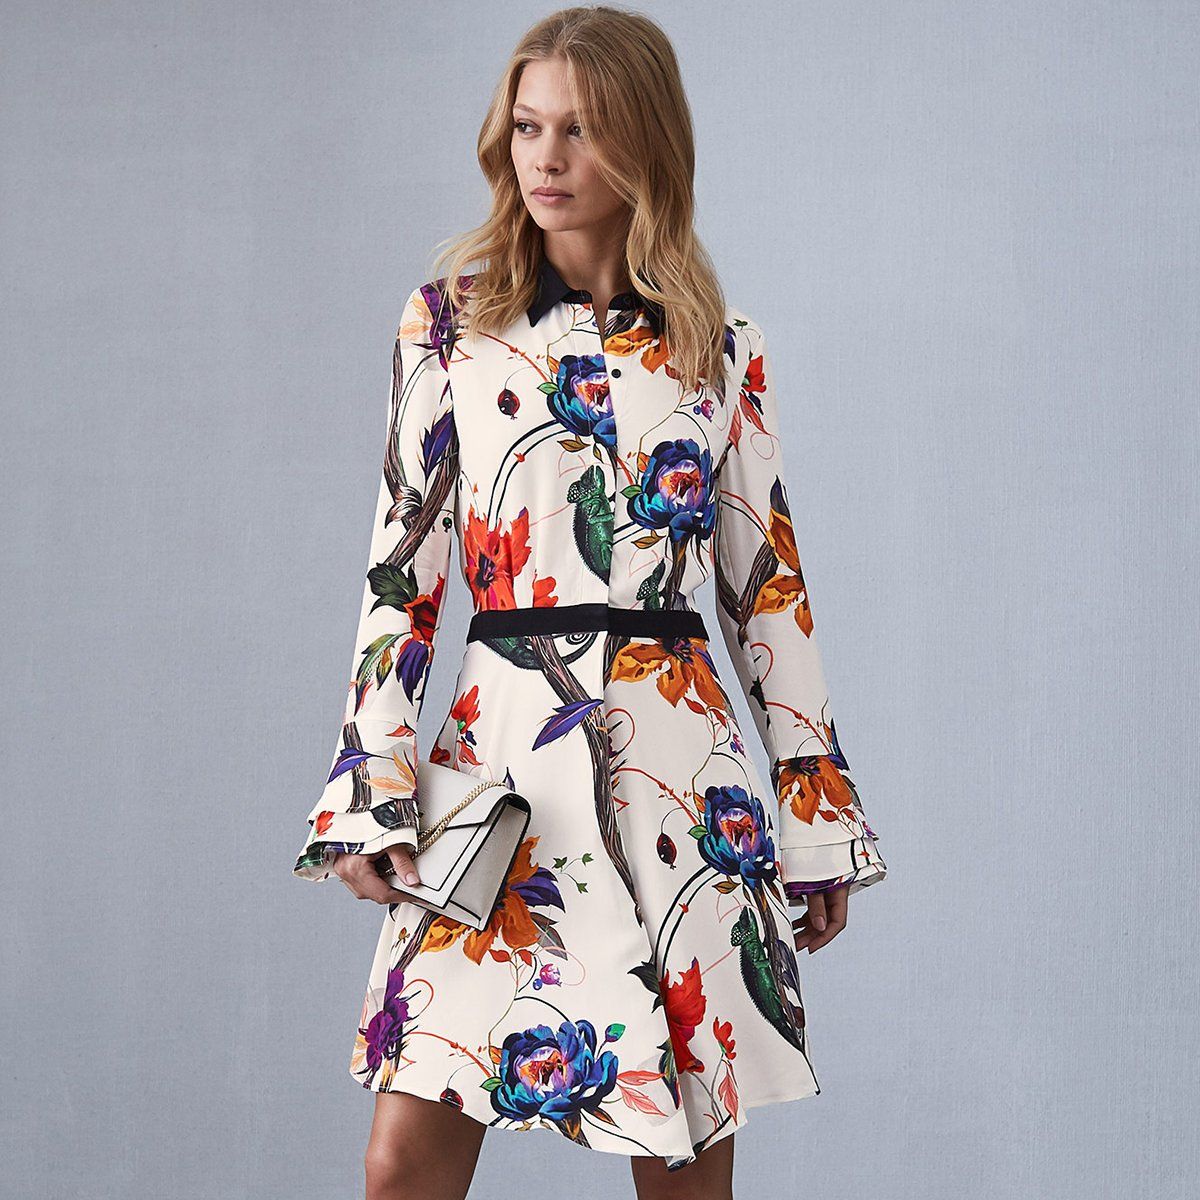 The evolution of floral prints in Fashion - Fashtory